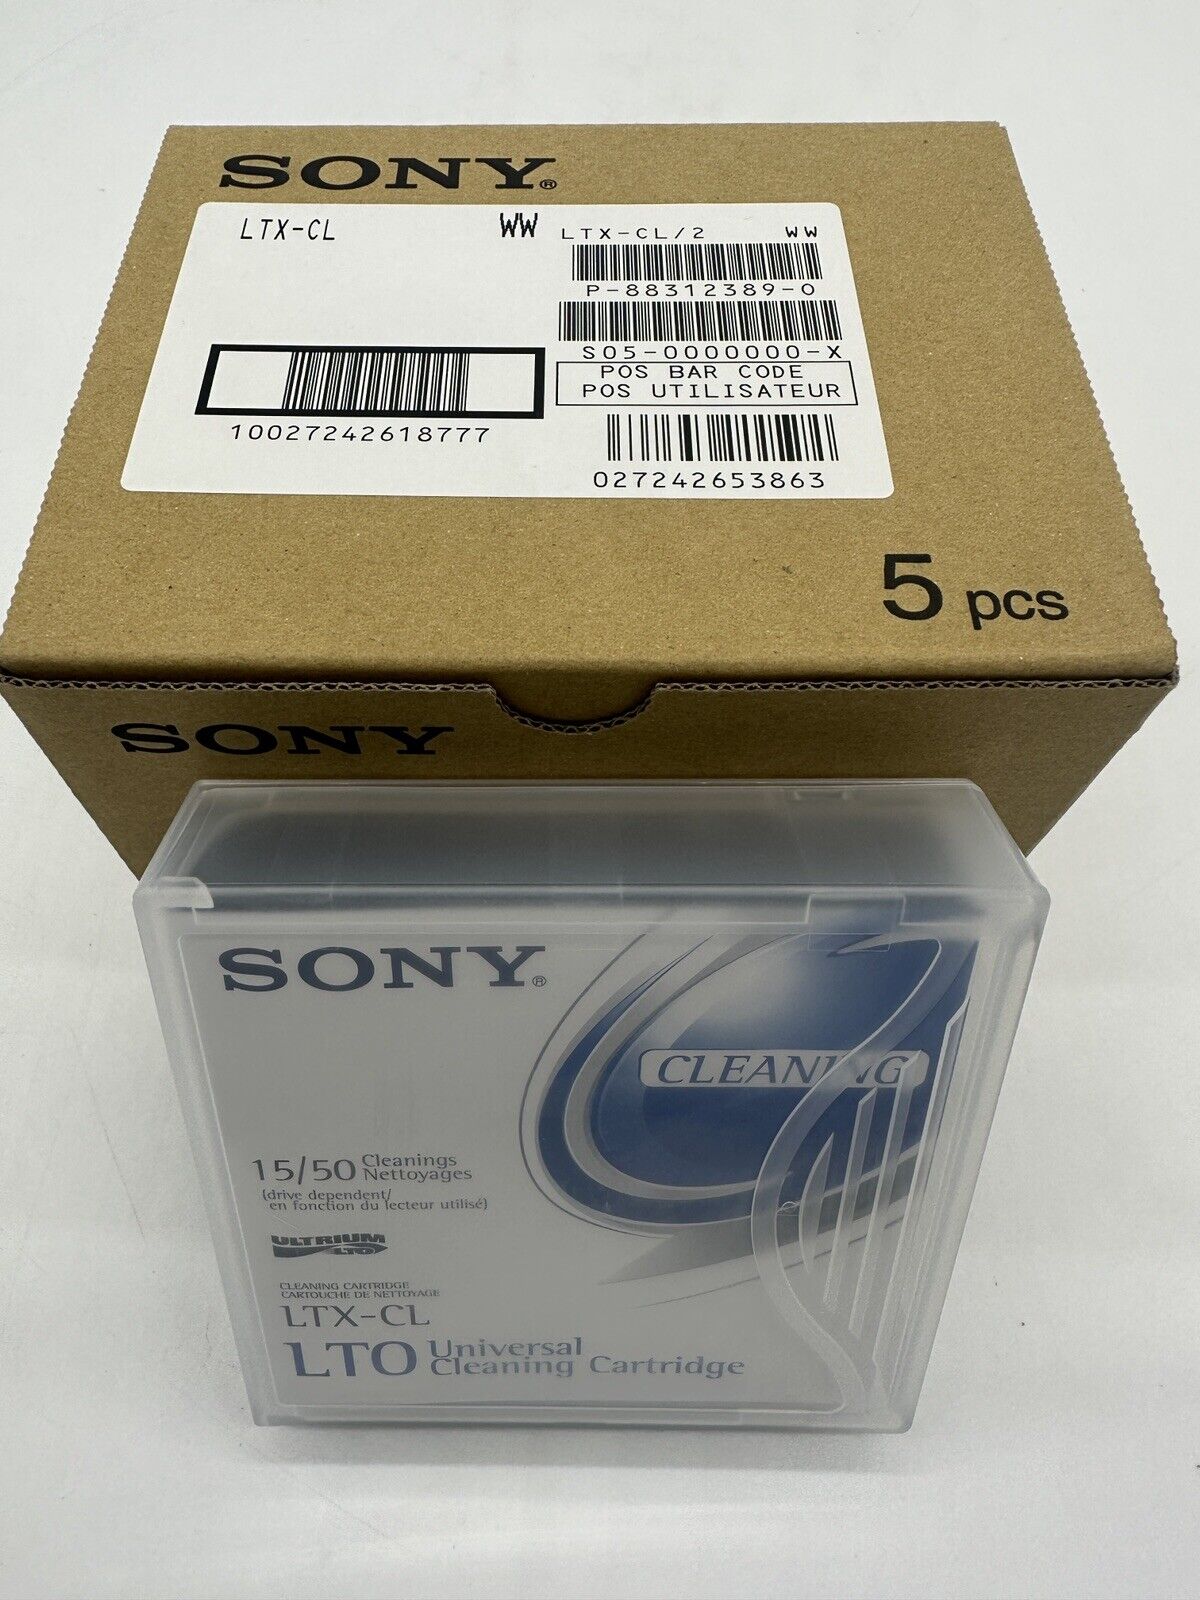 Box of 5  SONY LTX-CL Cleaning Cartridges *NEW*